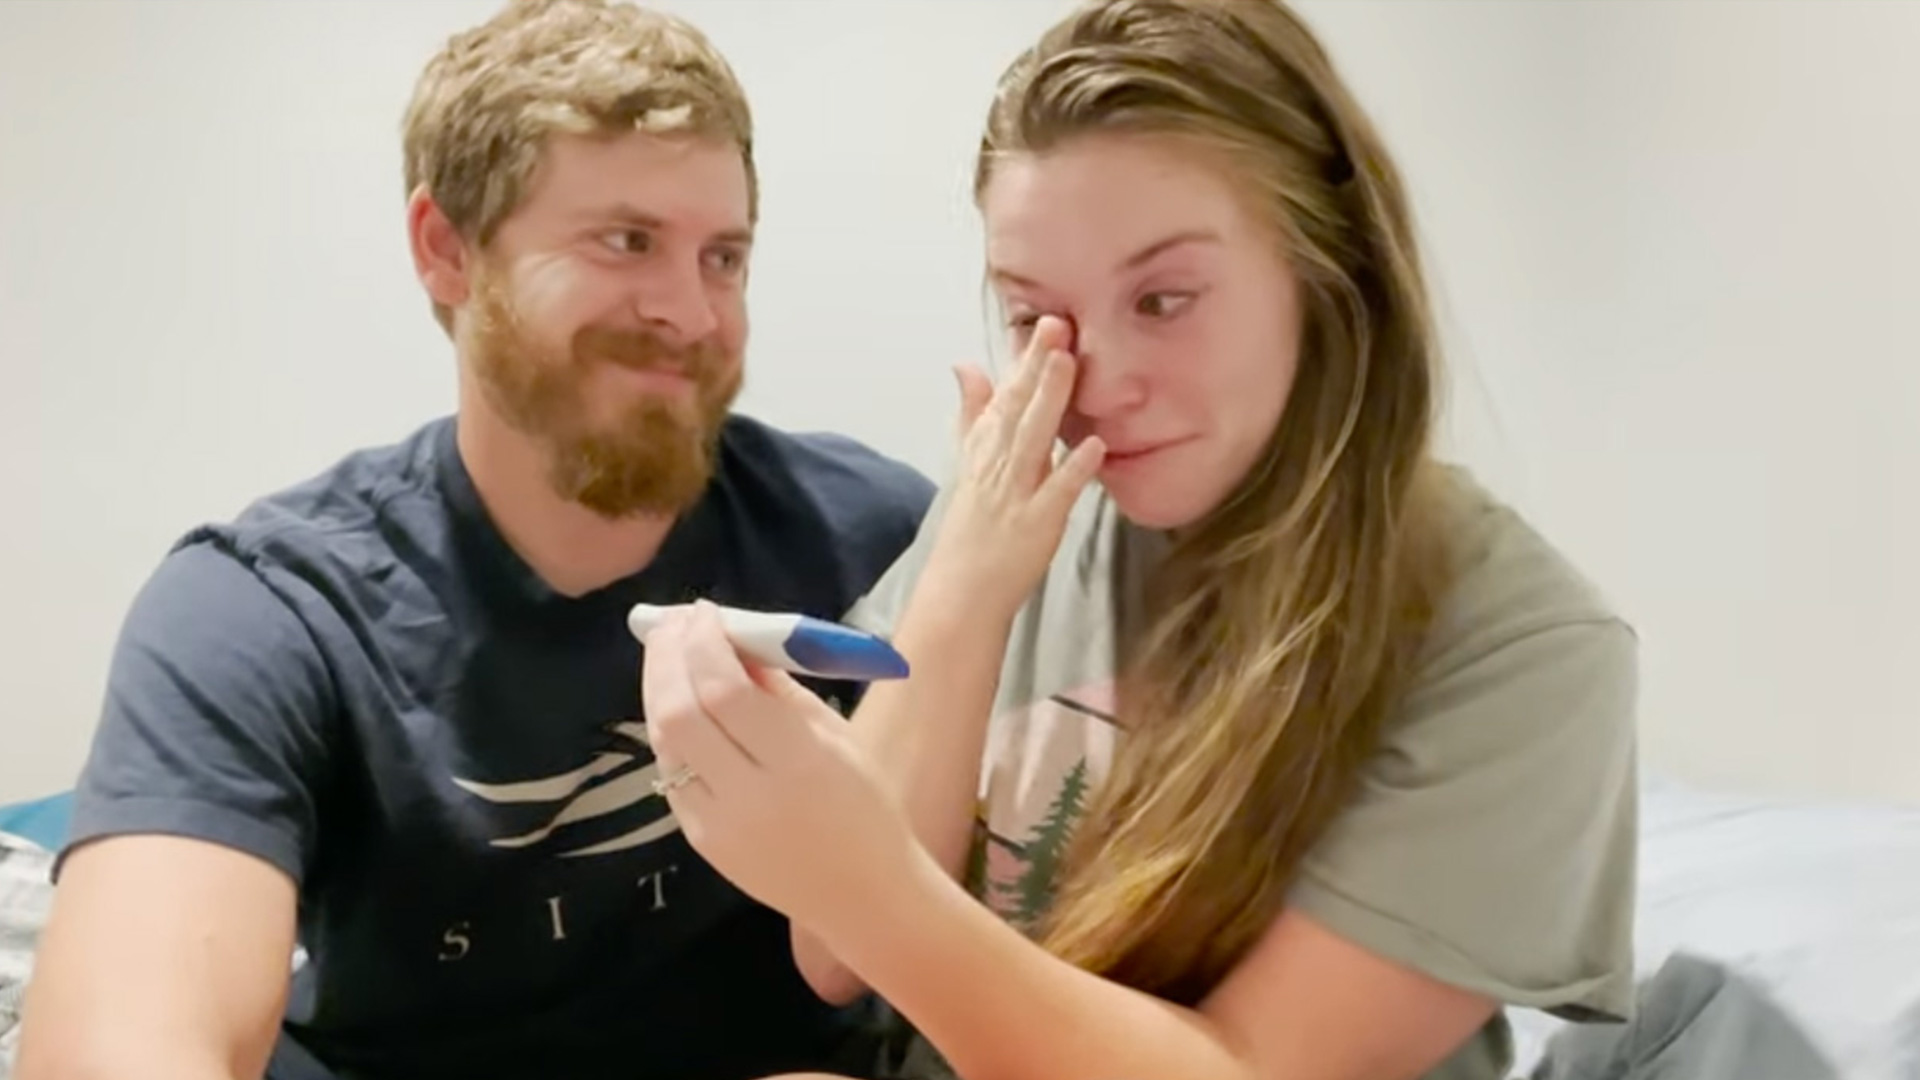 Joy-Anna Duggar’s husband Austin breaks down after learning they are expecting a third child.